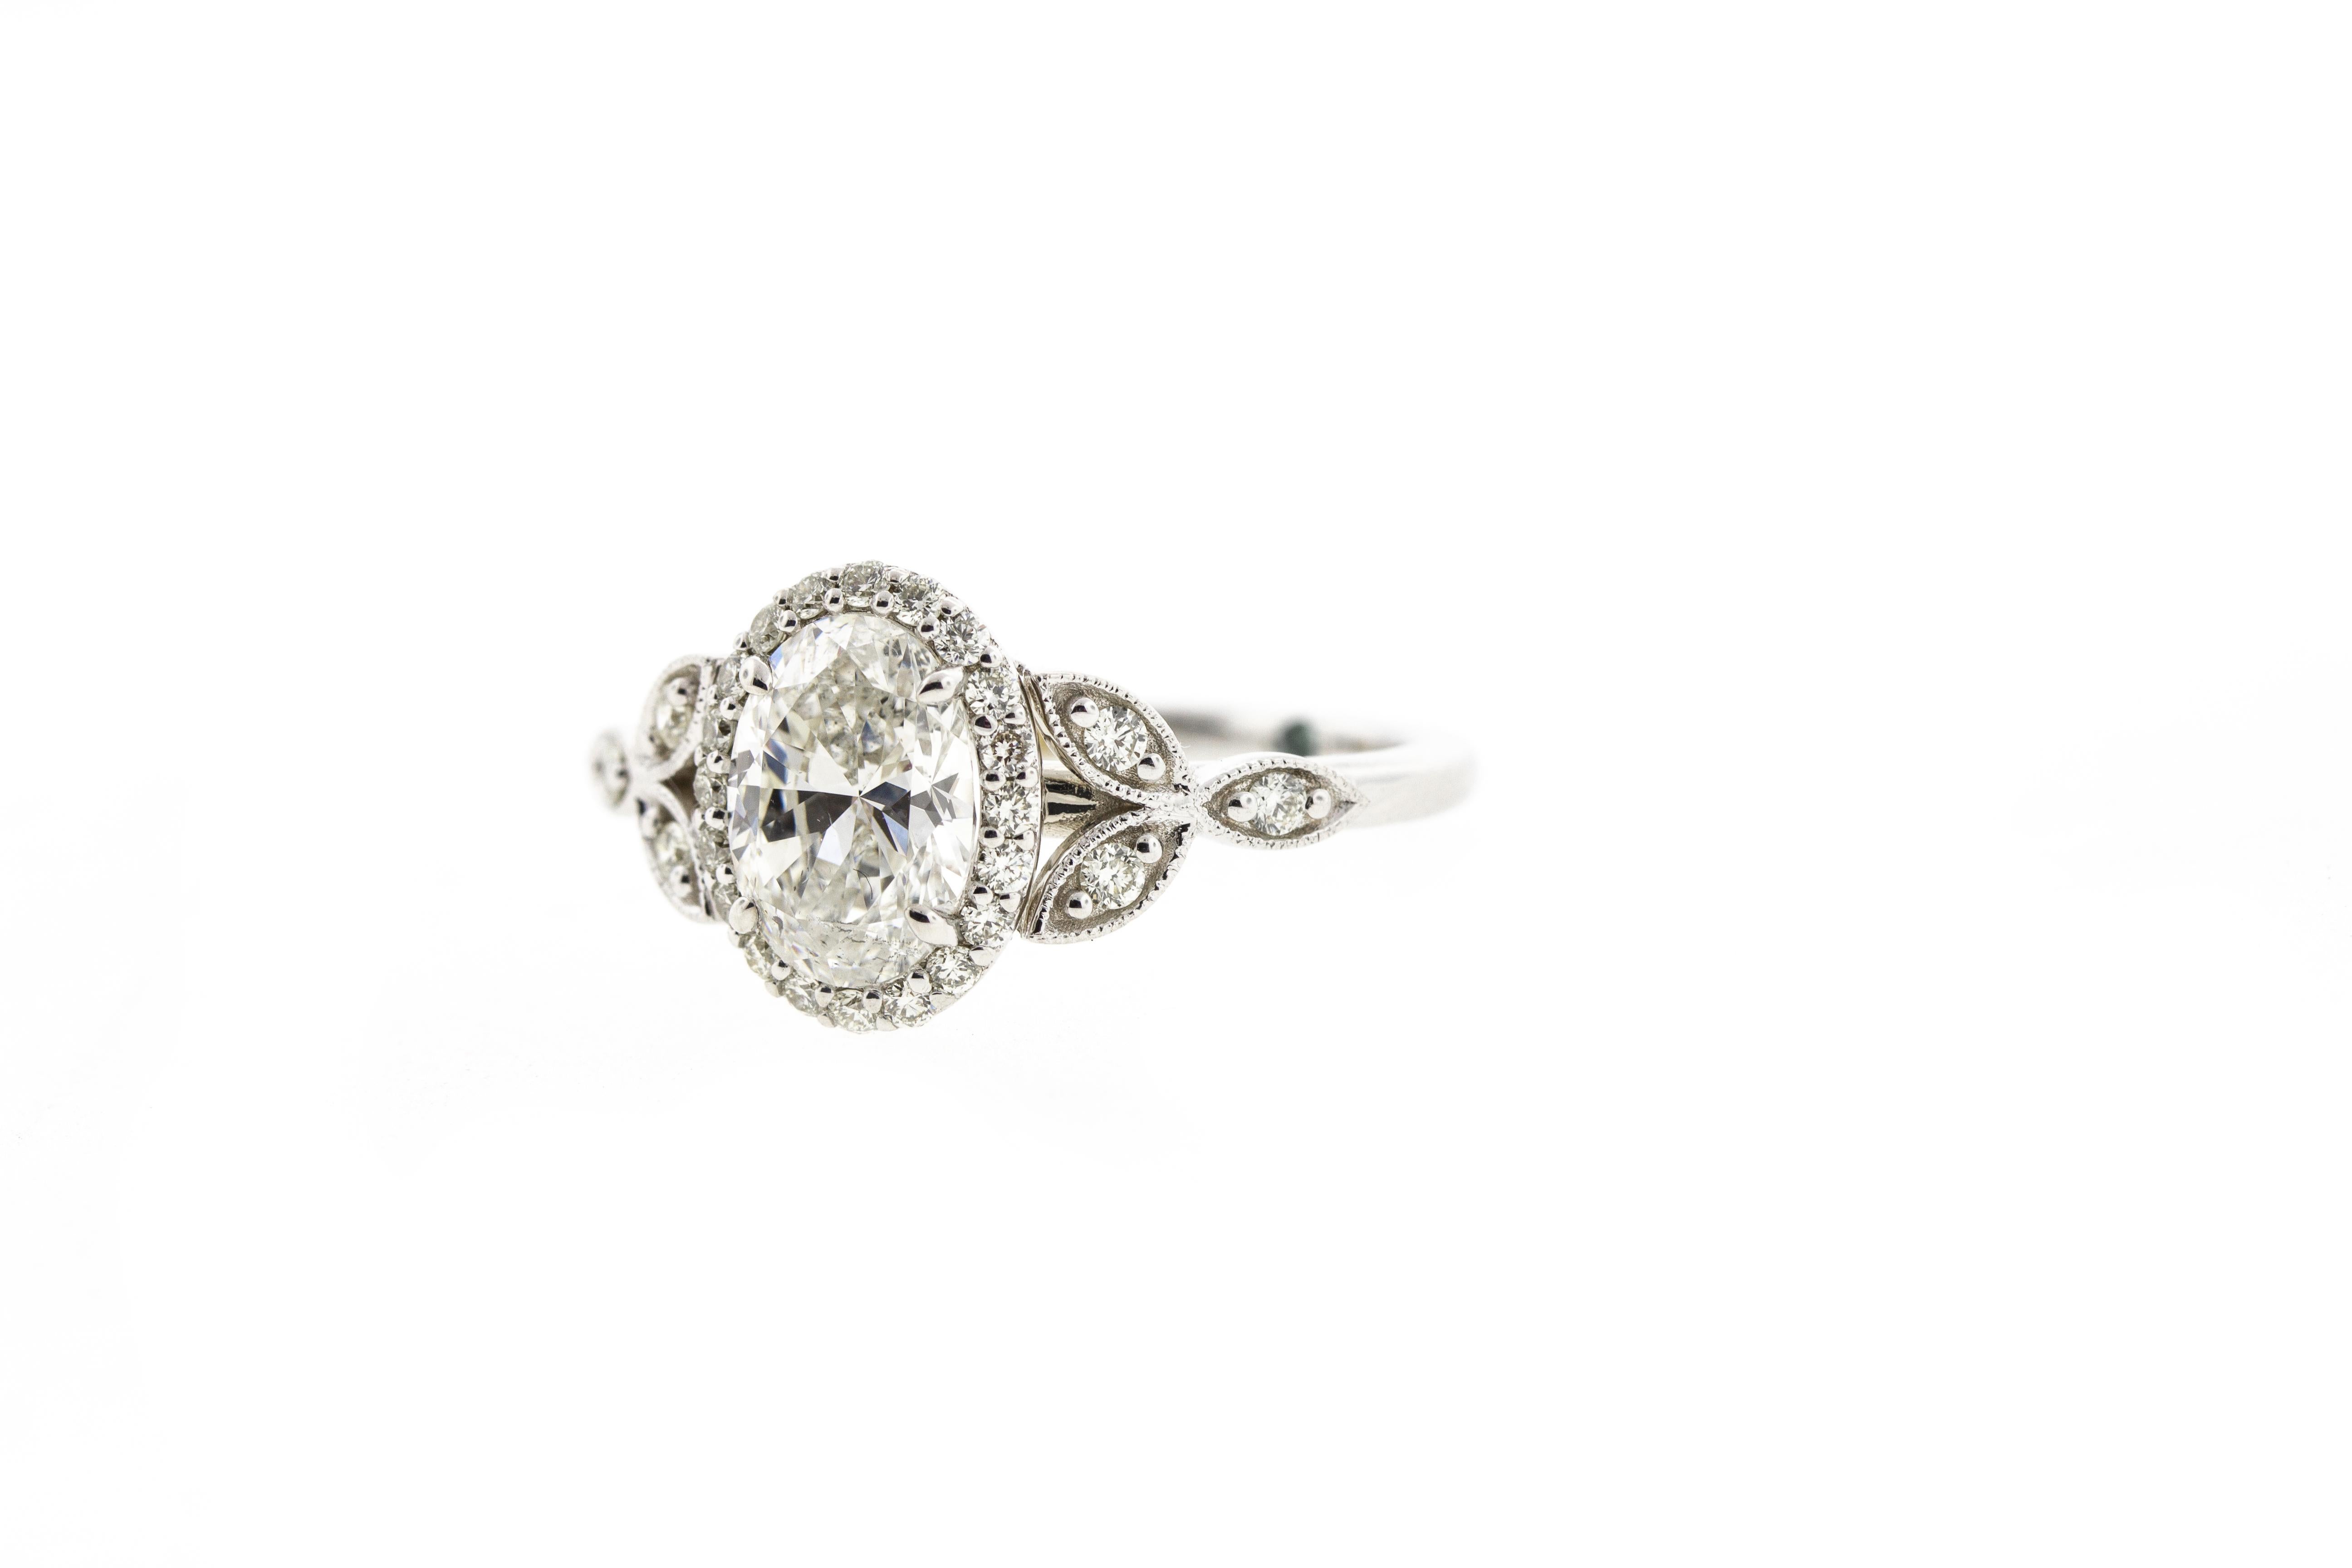 Unexpected and surprising detail abound with this delicate oval diamond engagement ring crafted in the Victorian style. A delicate balance of side diamonds and a diamond halo pull the entire look together. Hidden gemstones on the inside of the shank